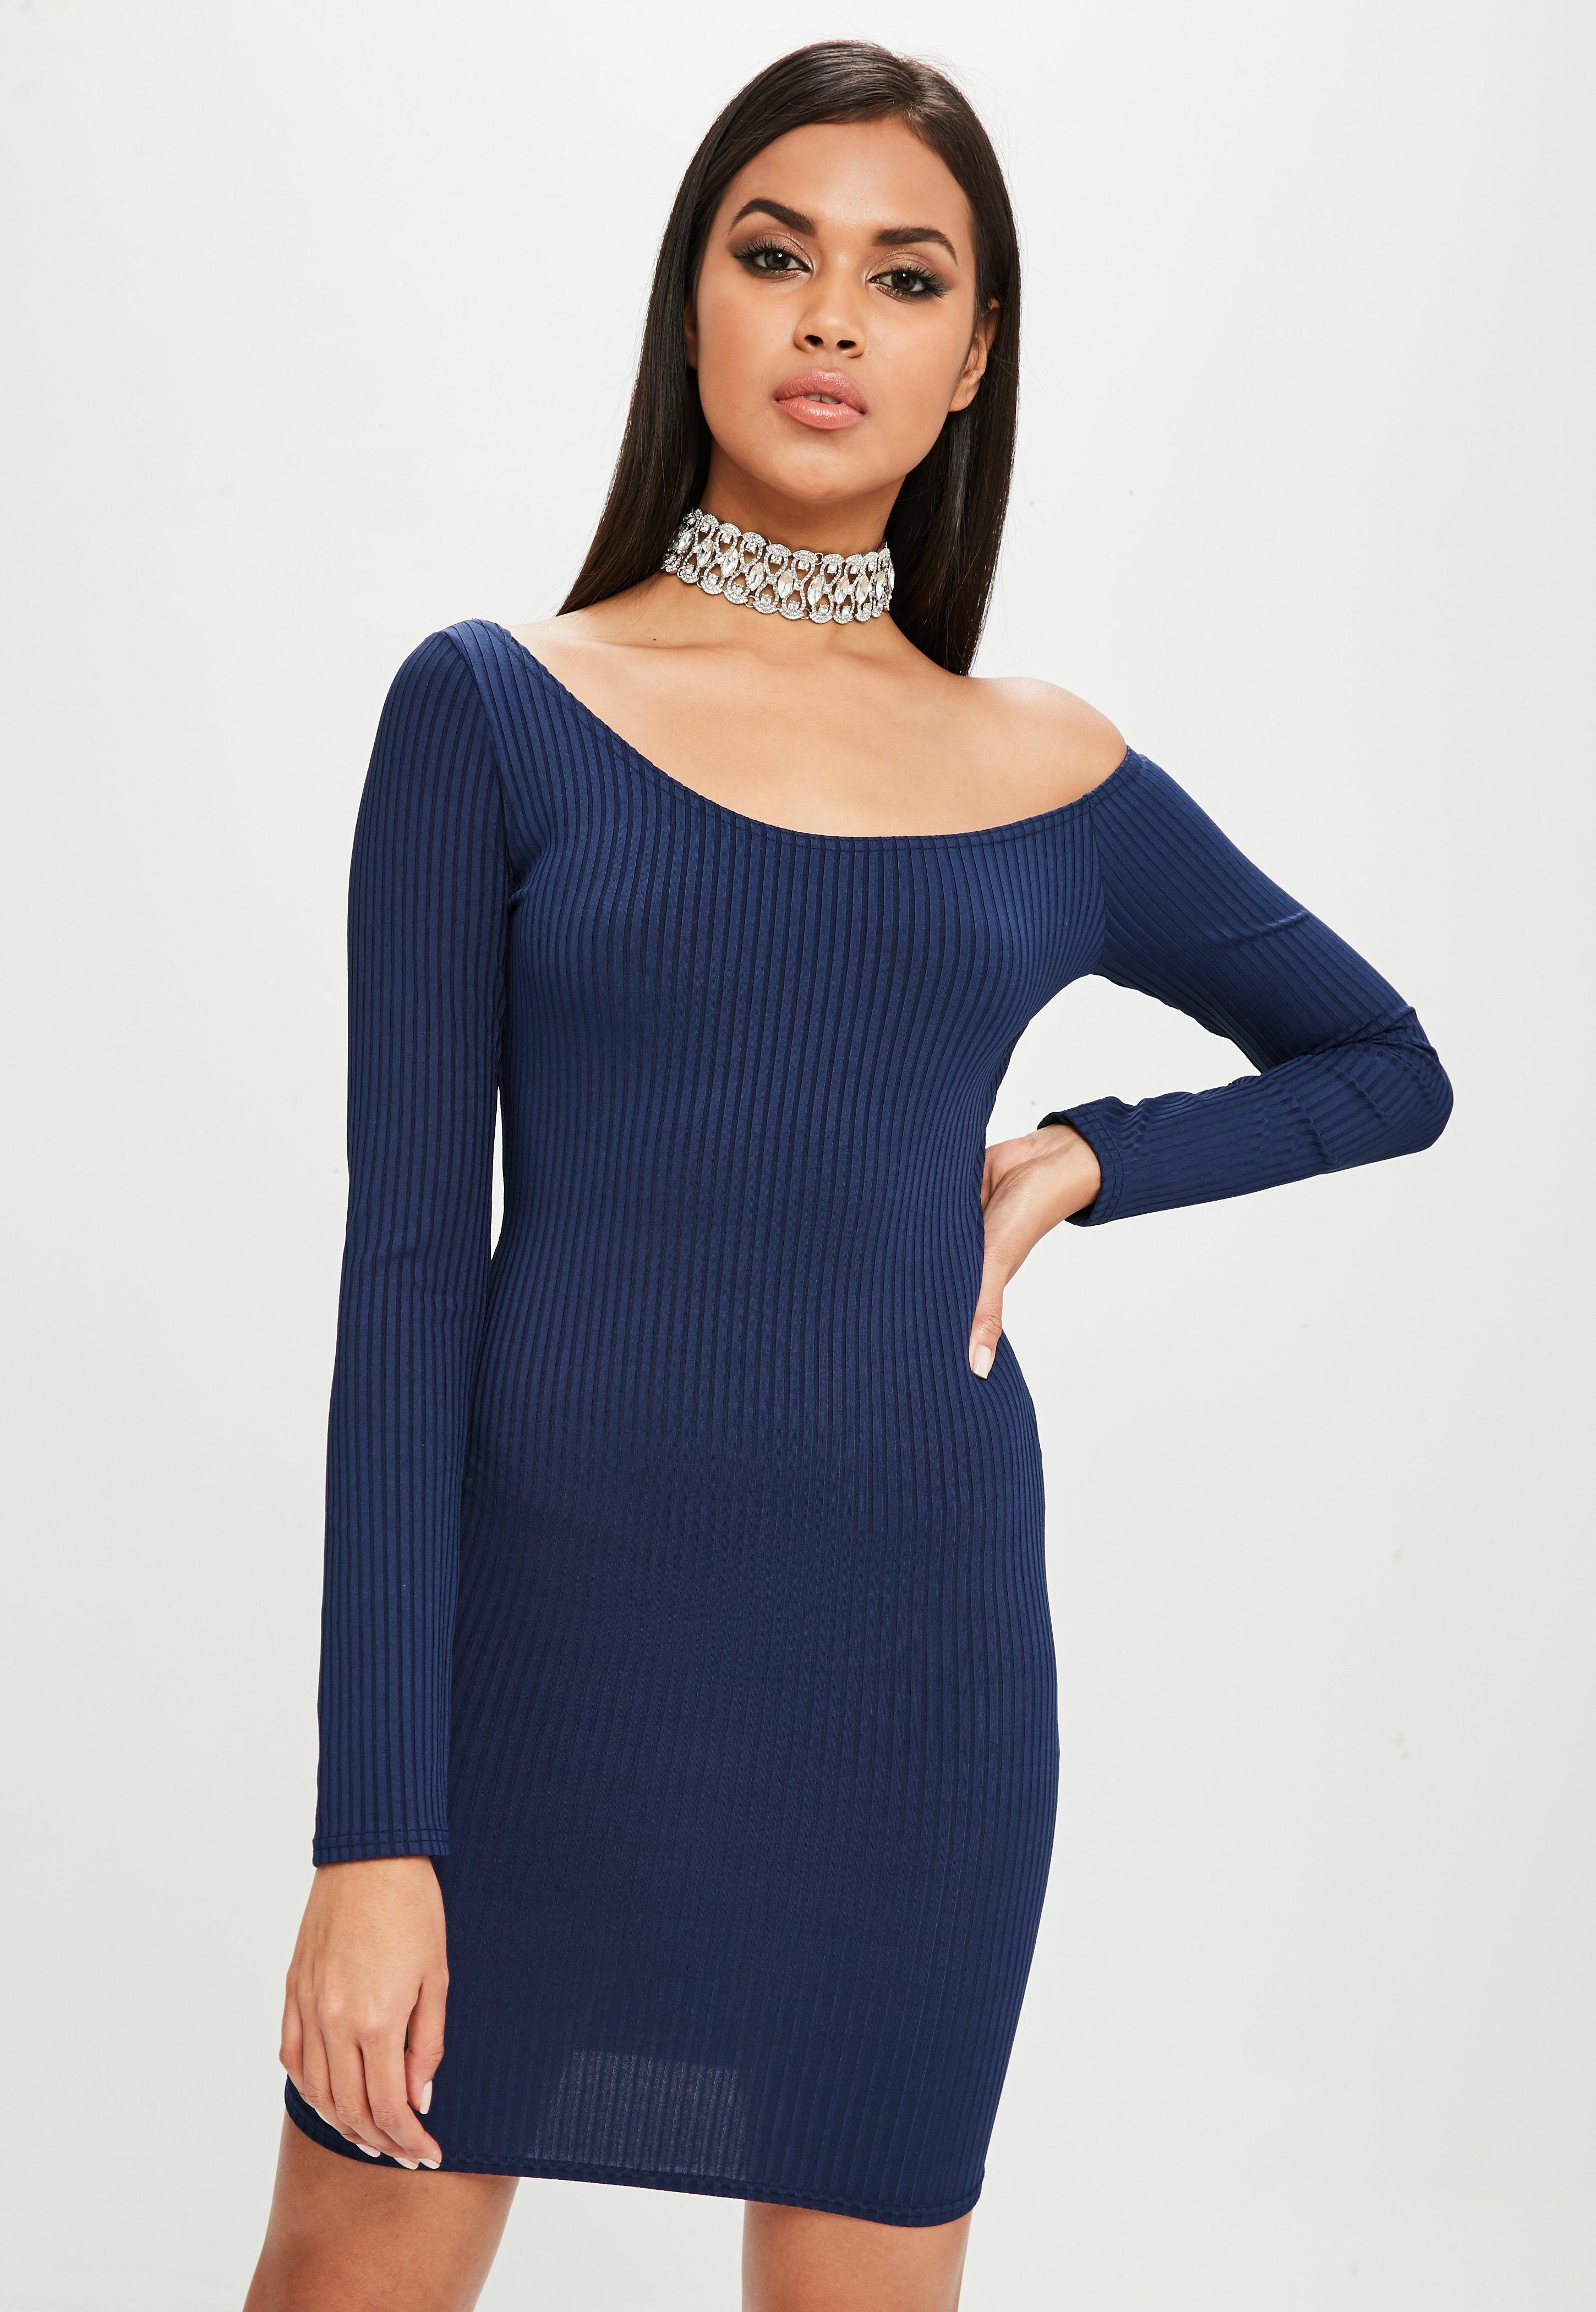 Missguided Synthetic Carli Bybel X Navy Long Sleeve Ribbed Dress In